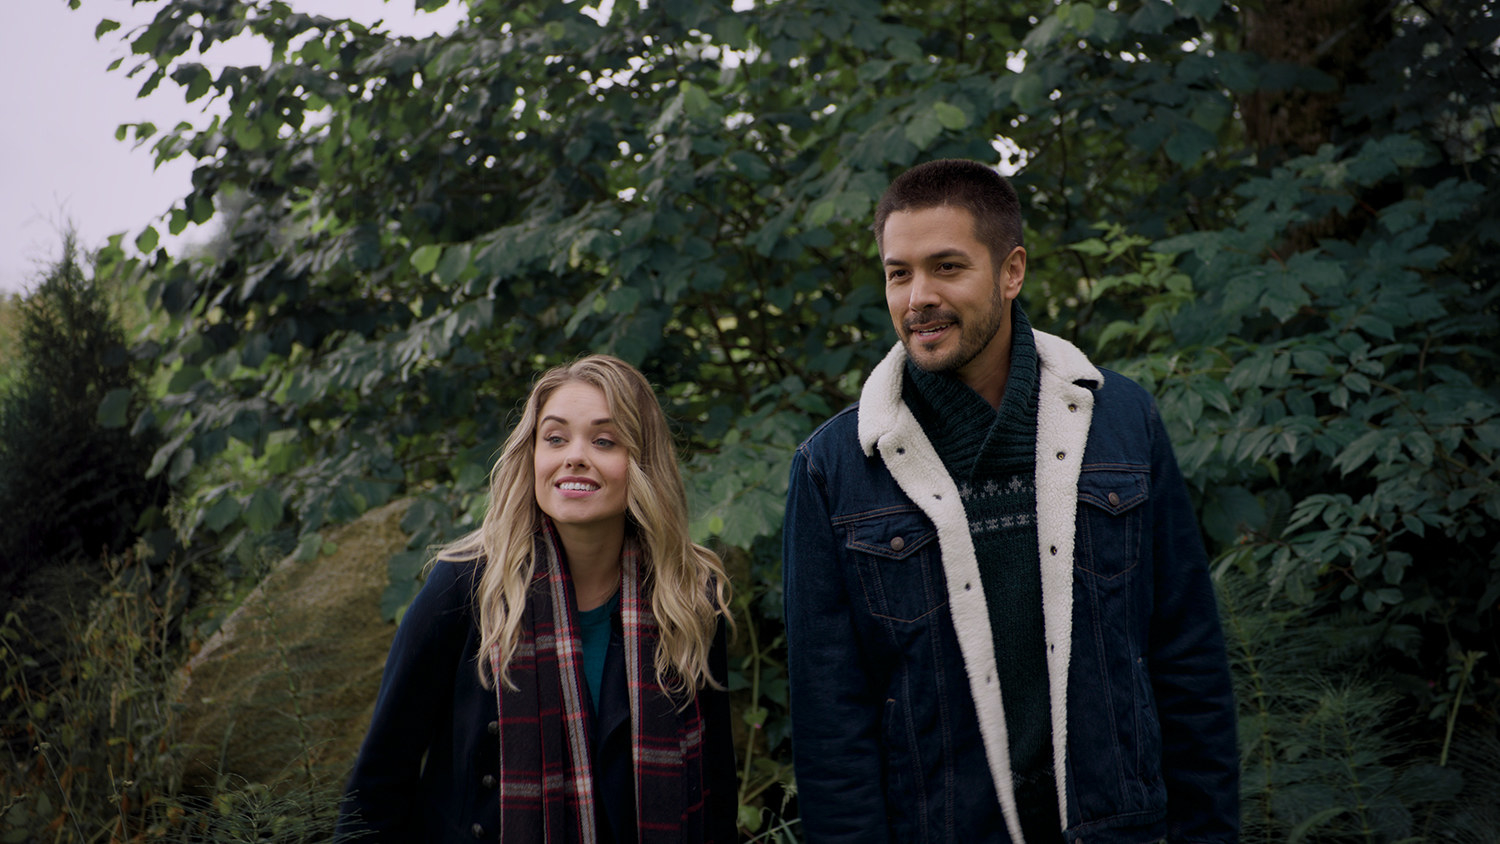 Stephanie Bennett and Marco Grazzini smile away from the camera with with trees behind them while walking